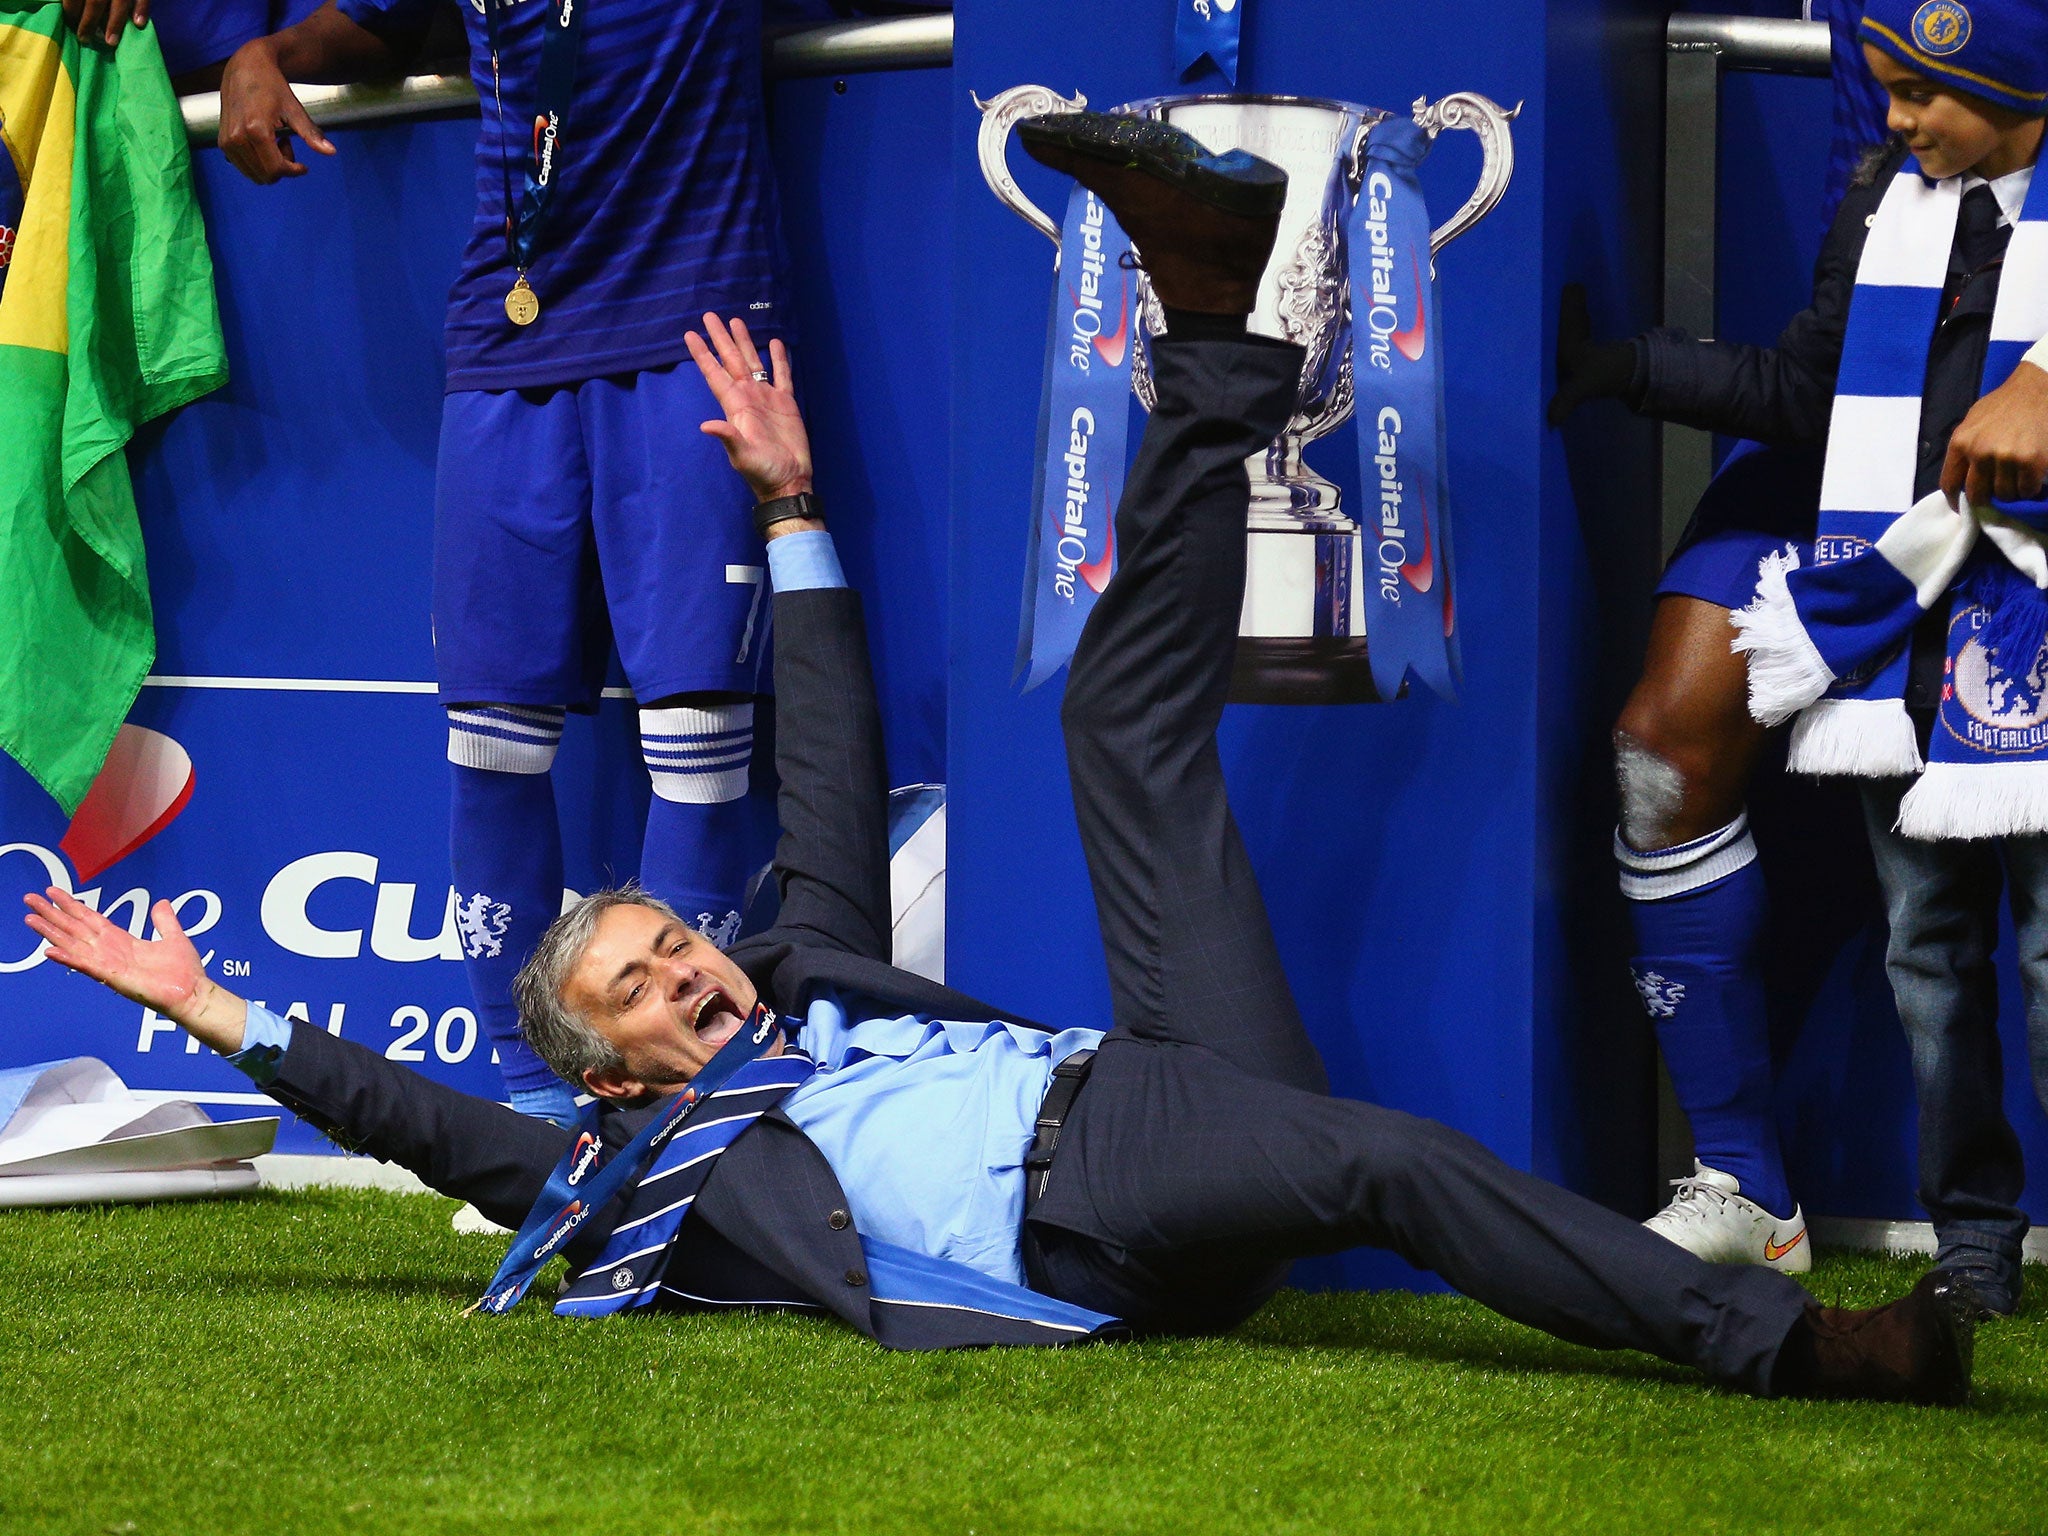 Jose Mourinho's Chelsea ran out 2-0 winners at Wembley